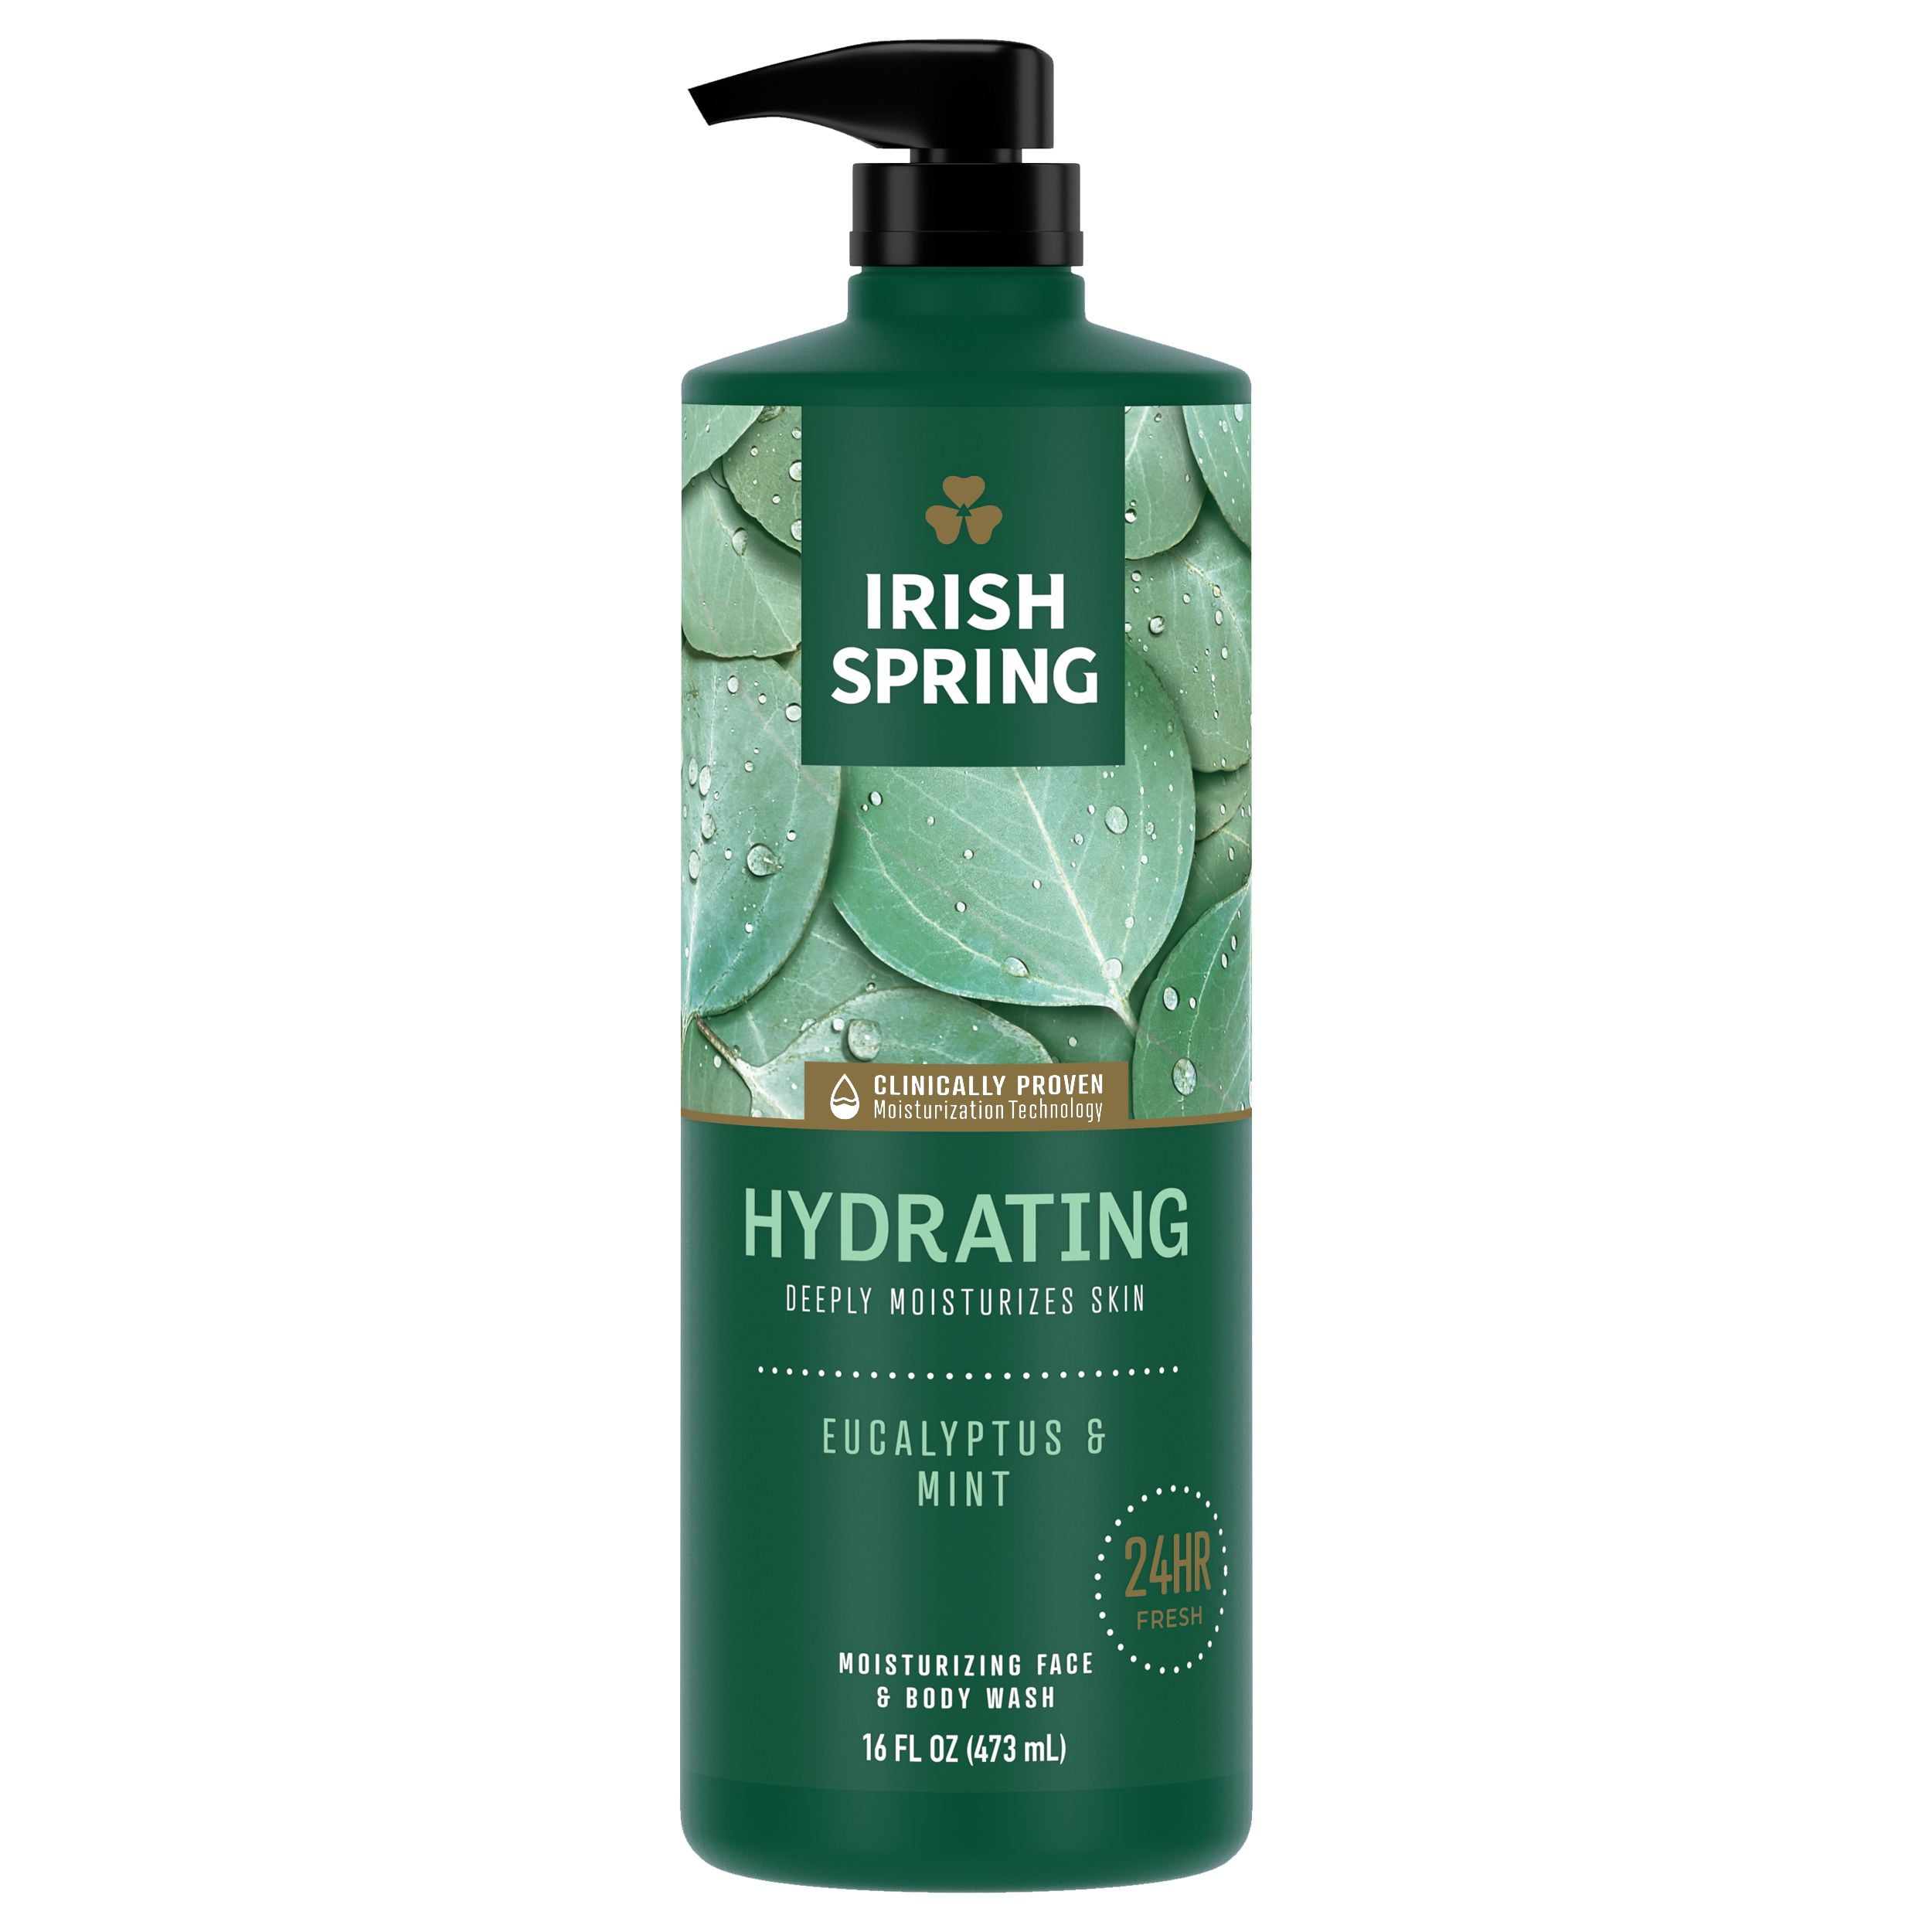 Irish Spring Hydrating Body Wash for Men, Moisturizing Body Wash, with Eucalyptus and Mint Scent, 16 Oz Pump